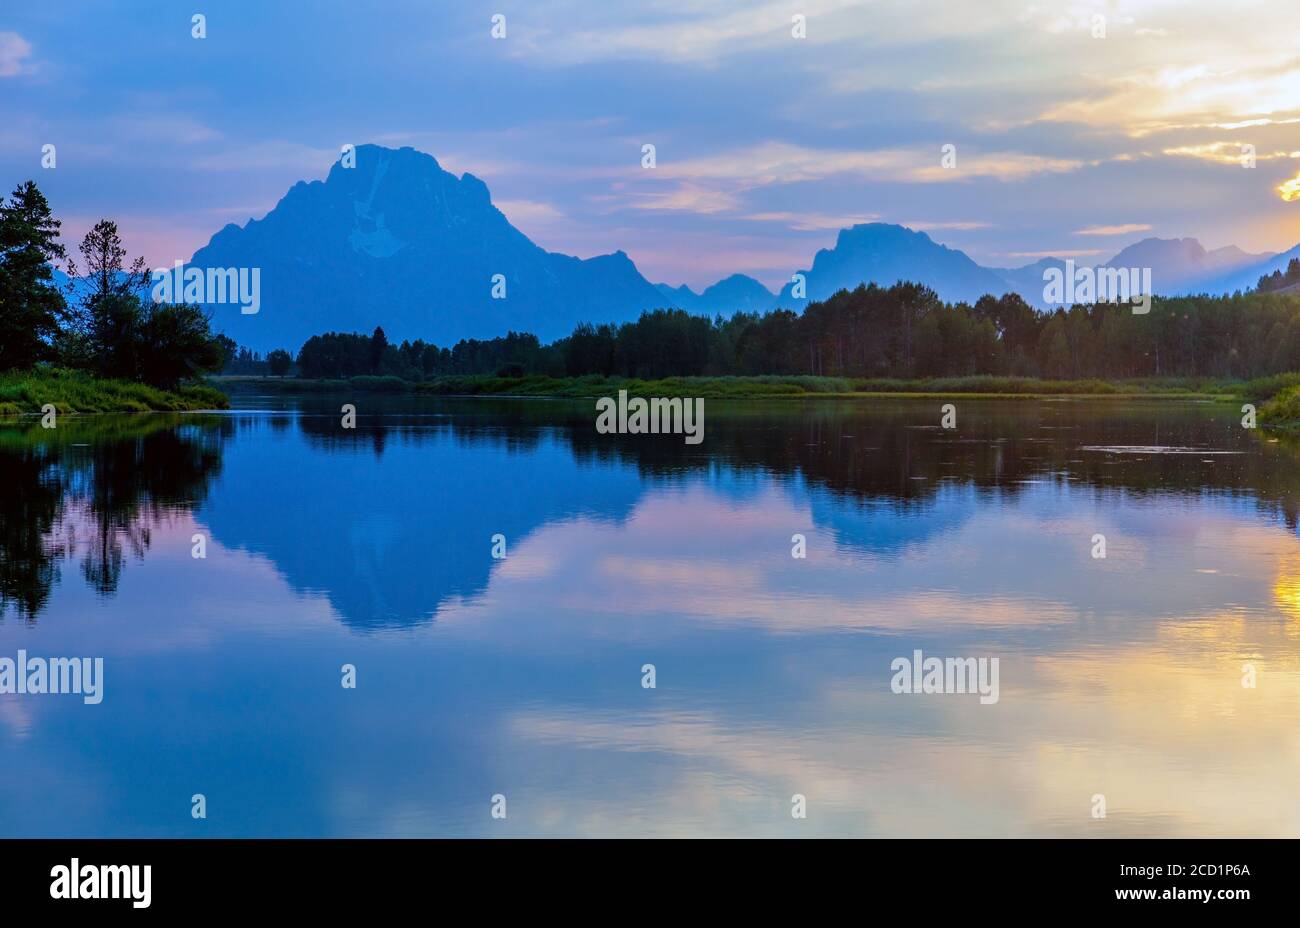 Oxbow Bend at Grand Teton National Park near Jackson, Wyoming with a view of Mount Moran reflecting in the Snake River at sunset Stock Photo